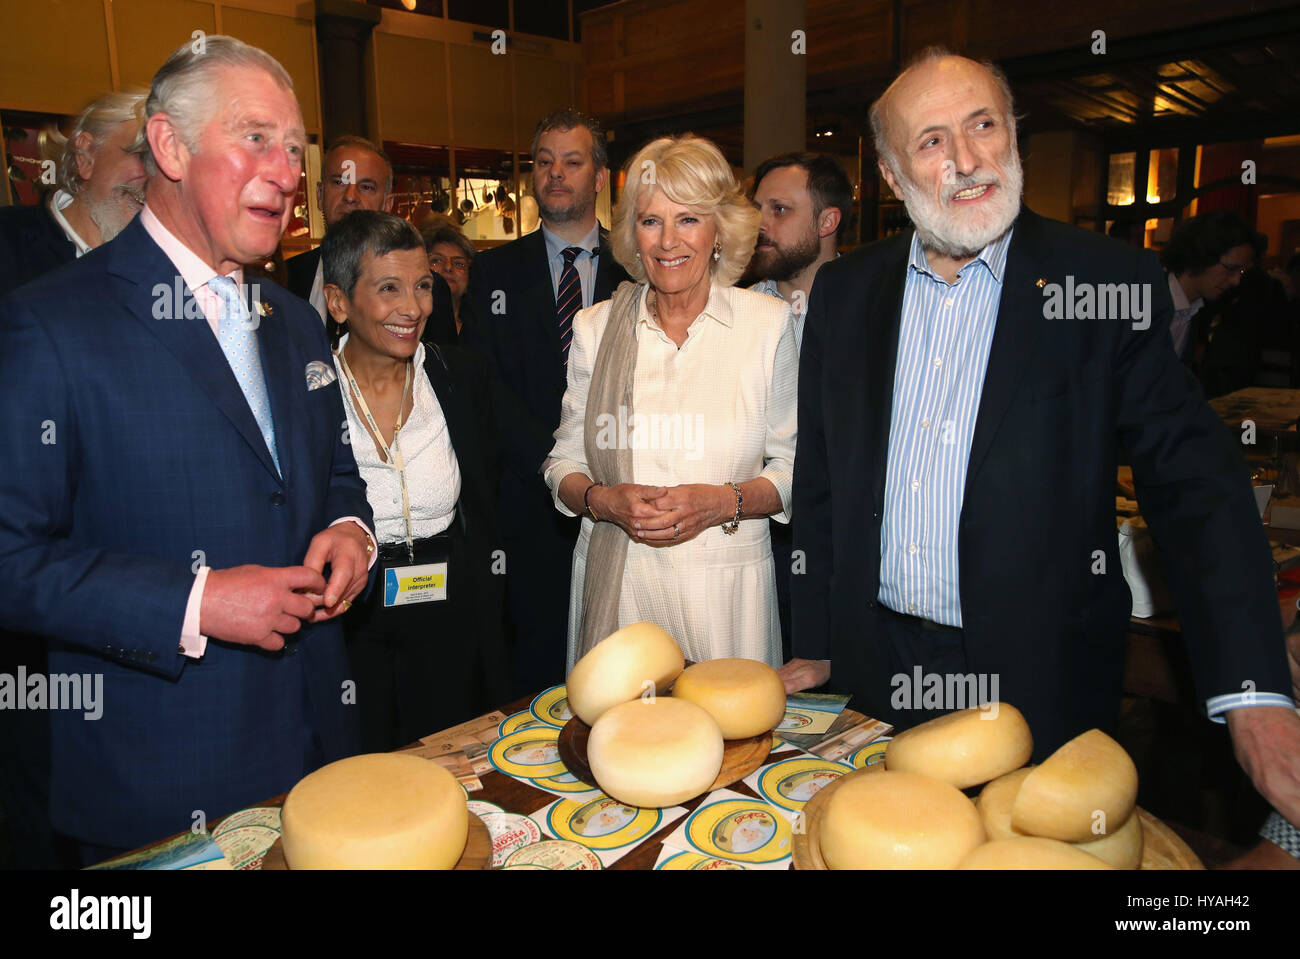 The Prince of Wales and the Duchess of Cornwall with the founder Carlo Petrini (right) as they visit Sant'Ambrogio Market to celebrate the Slow Food movement and meet local food producers of the Abruzzo region and areas affected by the Italian earthquakes of 2016, on the sixth day of his nine-day European tour. Stock Photo